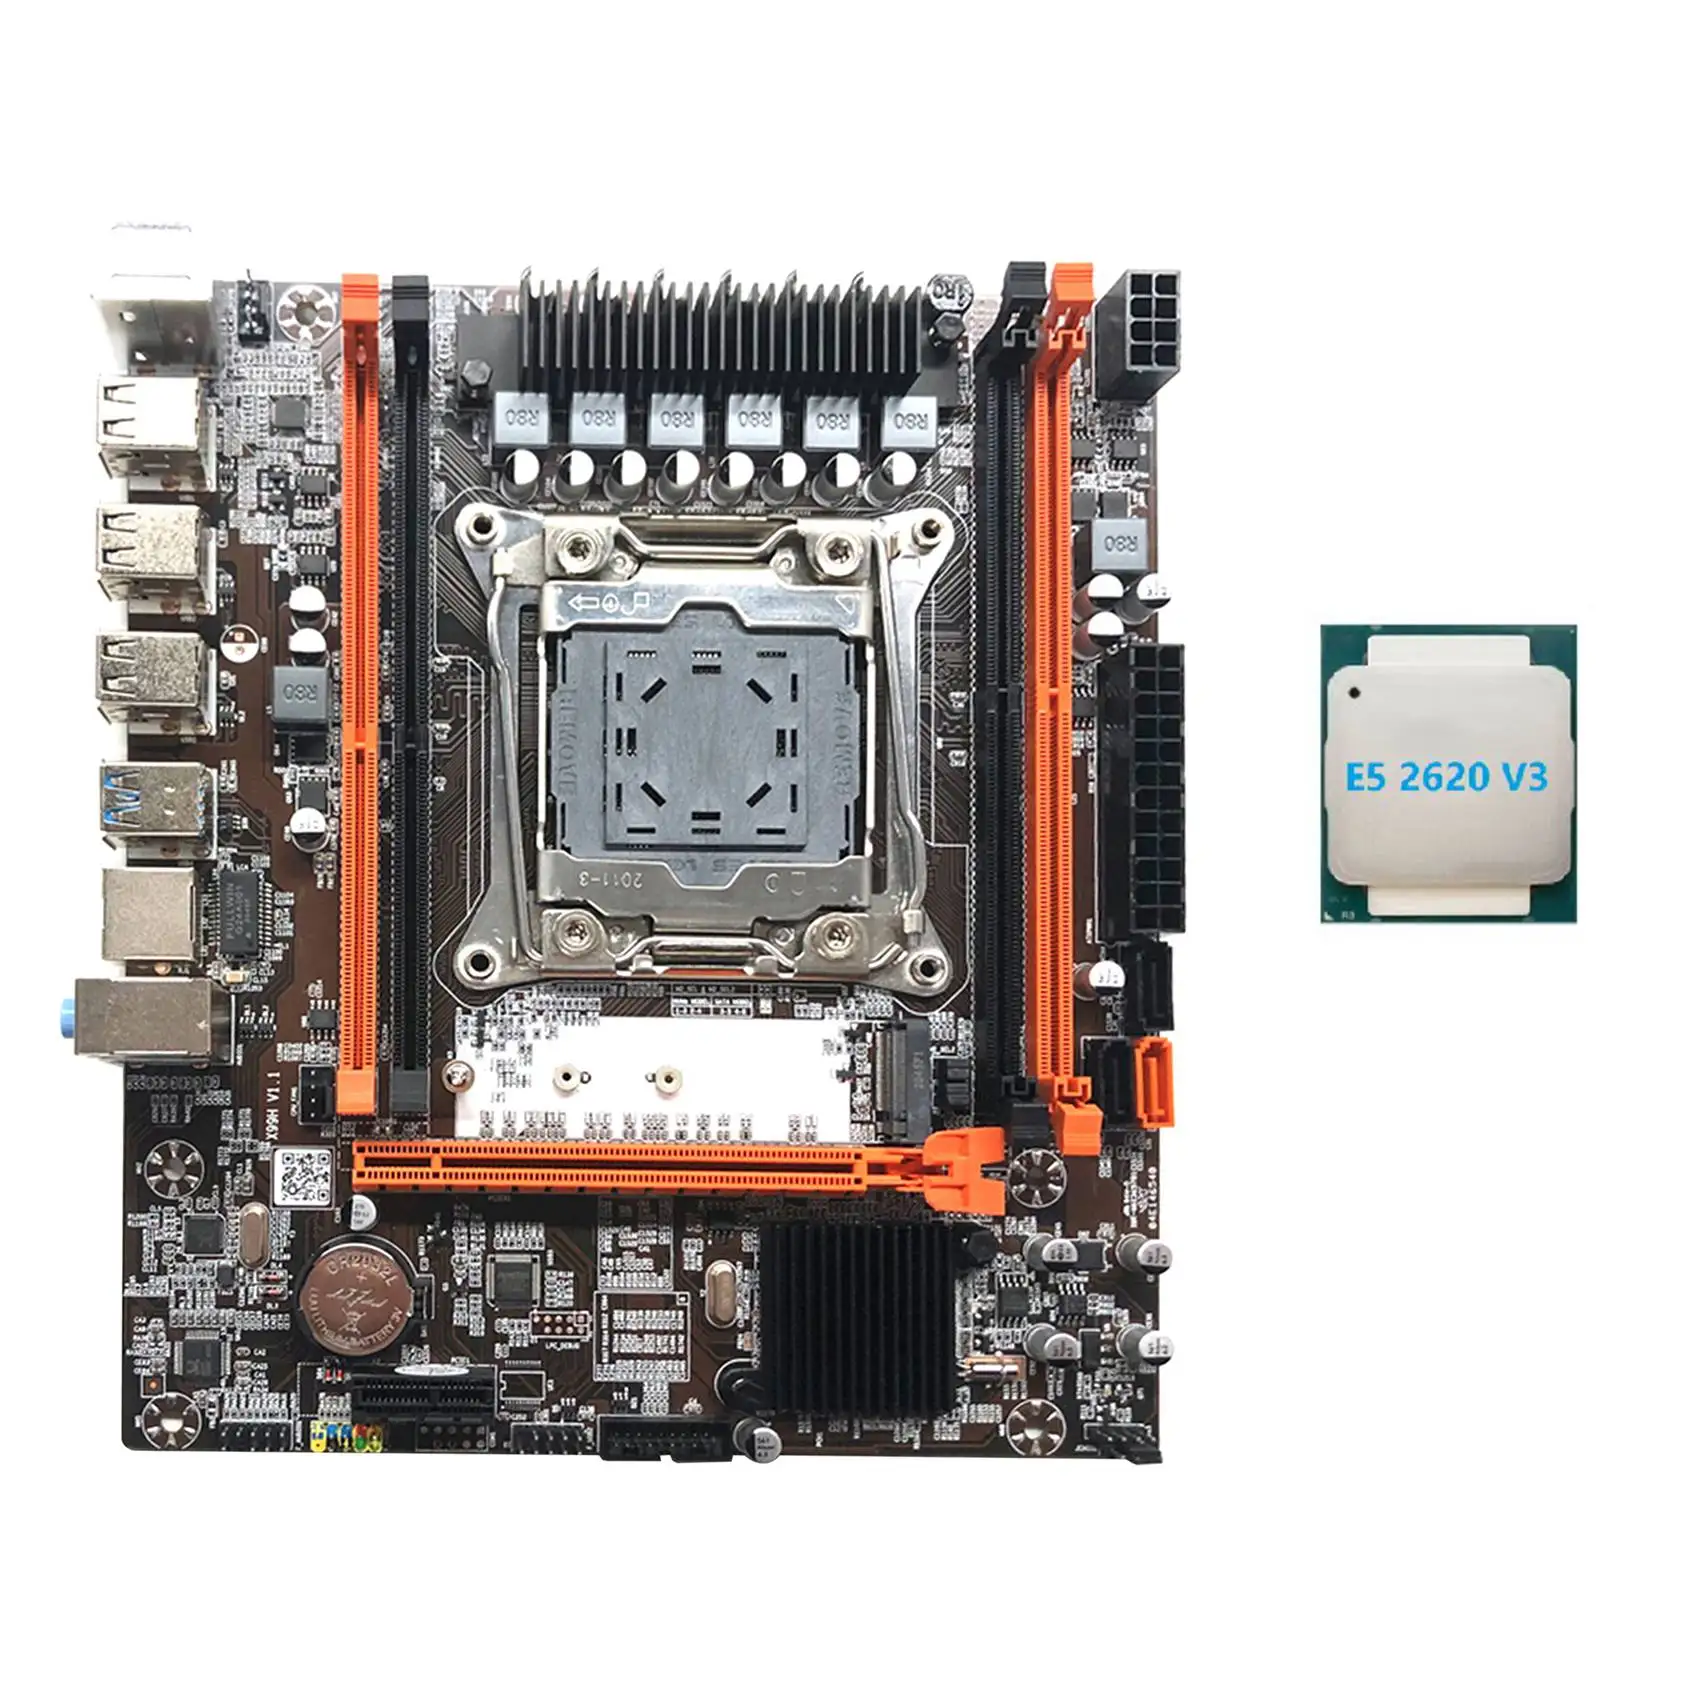 

X99H Motherboard LGA2011-3 Computer Motherboard Support Xeon E5 2678 2666 V3 Series CPU with E5 2620 V3 CPU